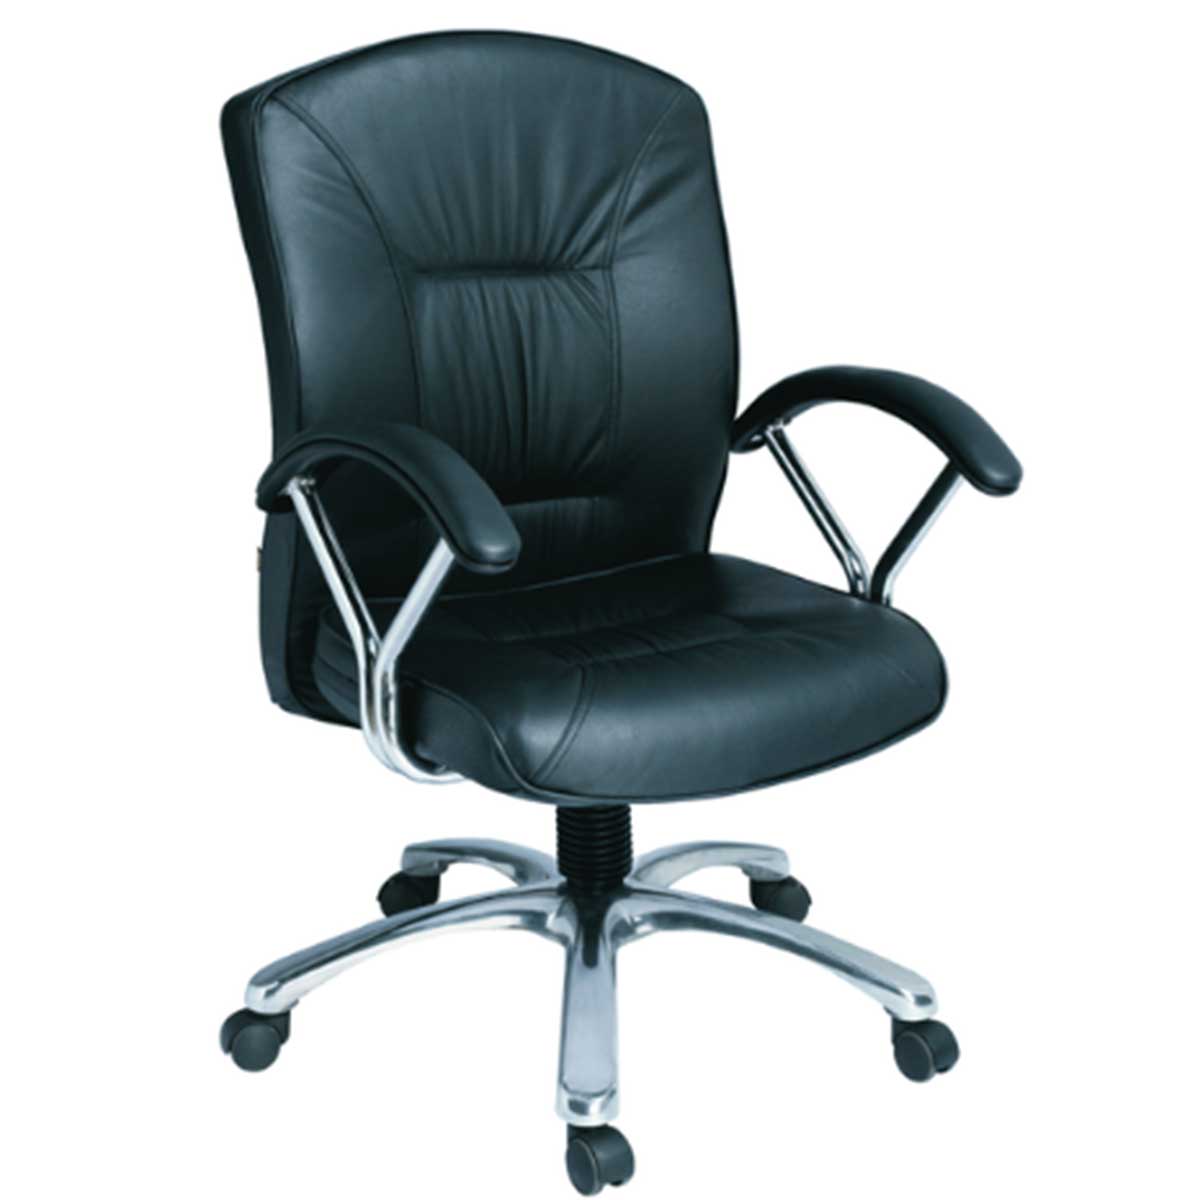 Godrej office chair Manufacturers, Suppliers in Rohini Sector 11